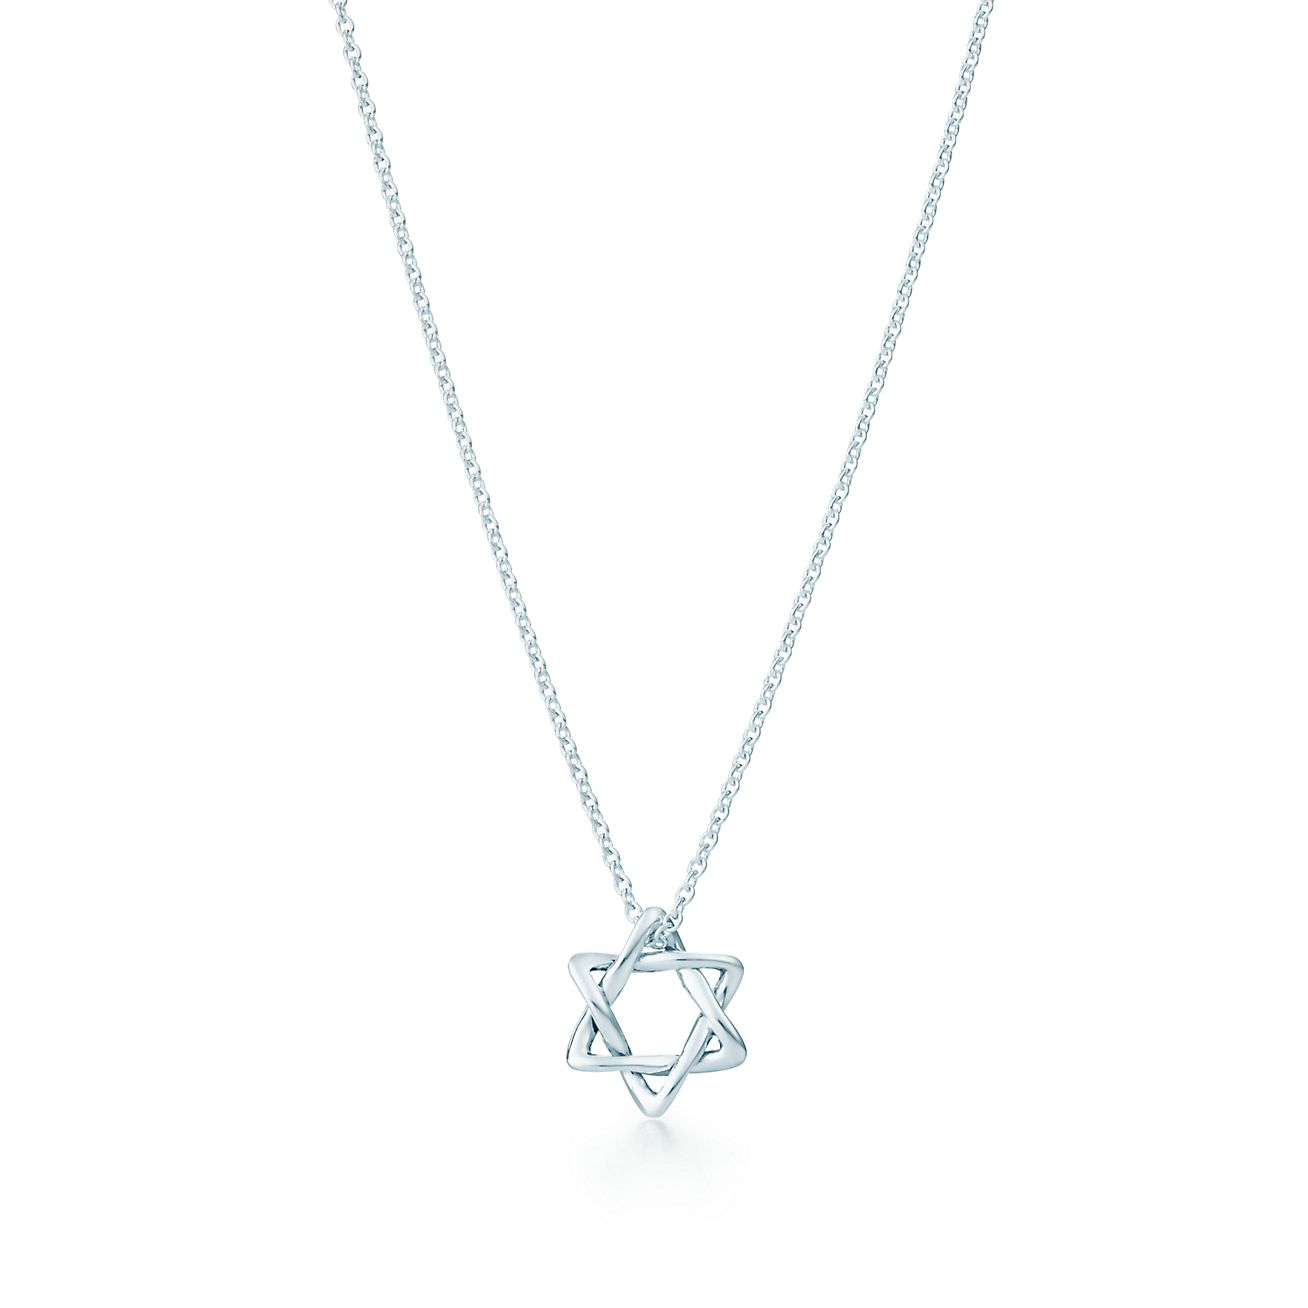 Shine Bright With Star Of David Pendants For Women